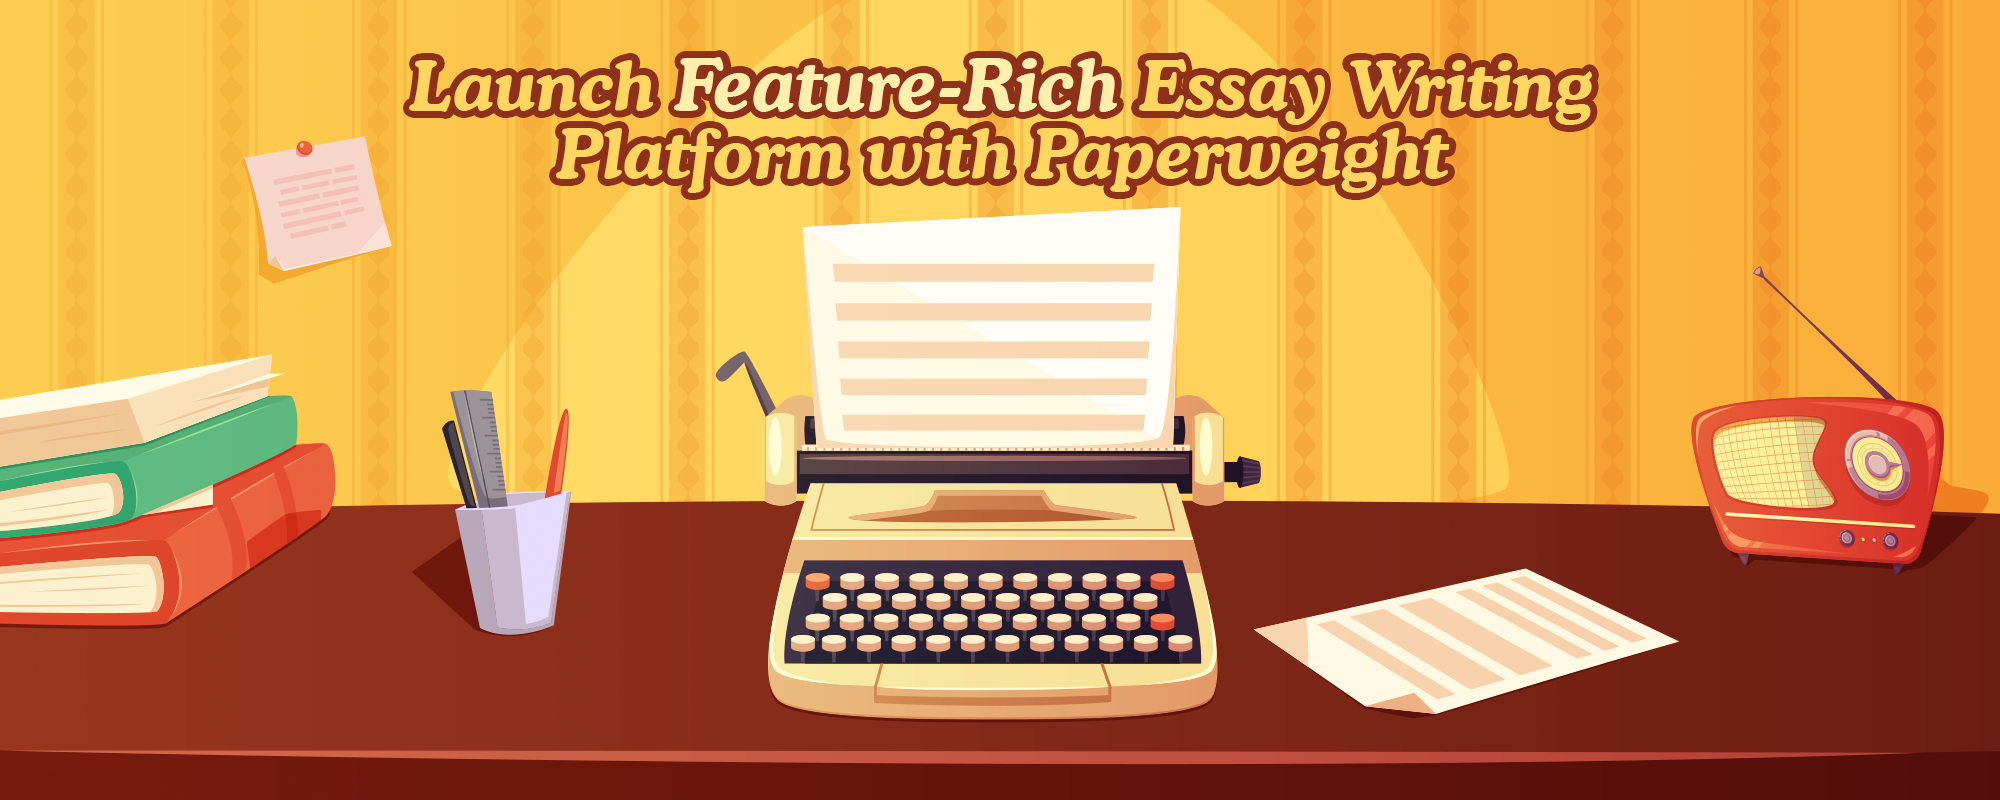 Launch Feature-Rich Essay Writing Platform in a Jiffy with Paperweight